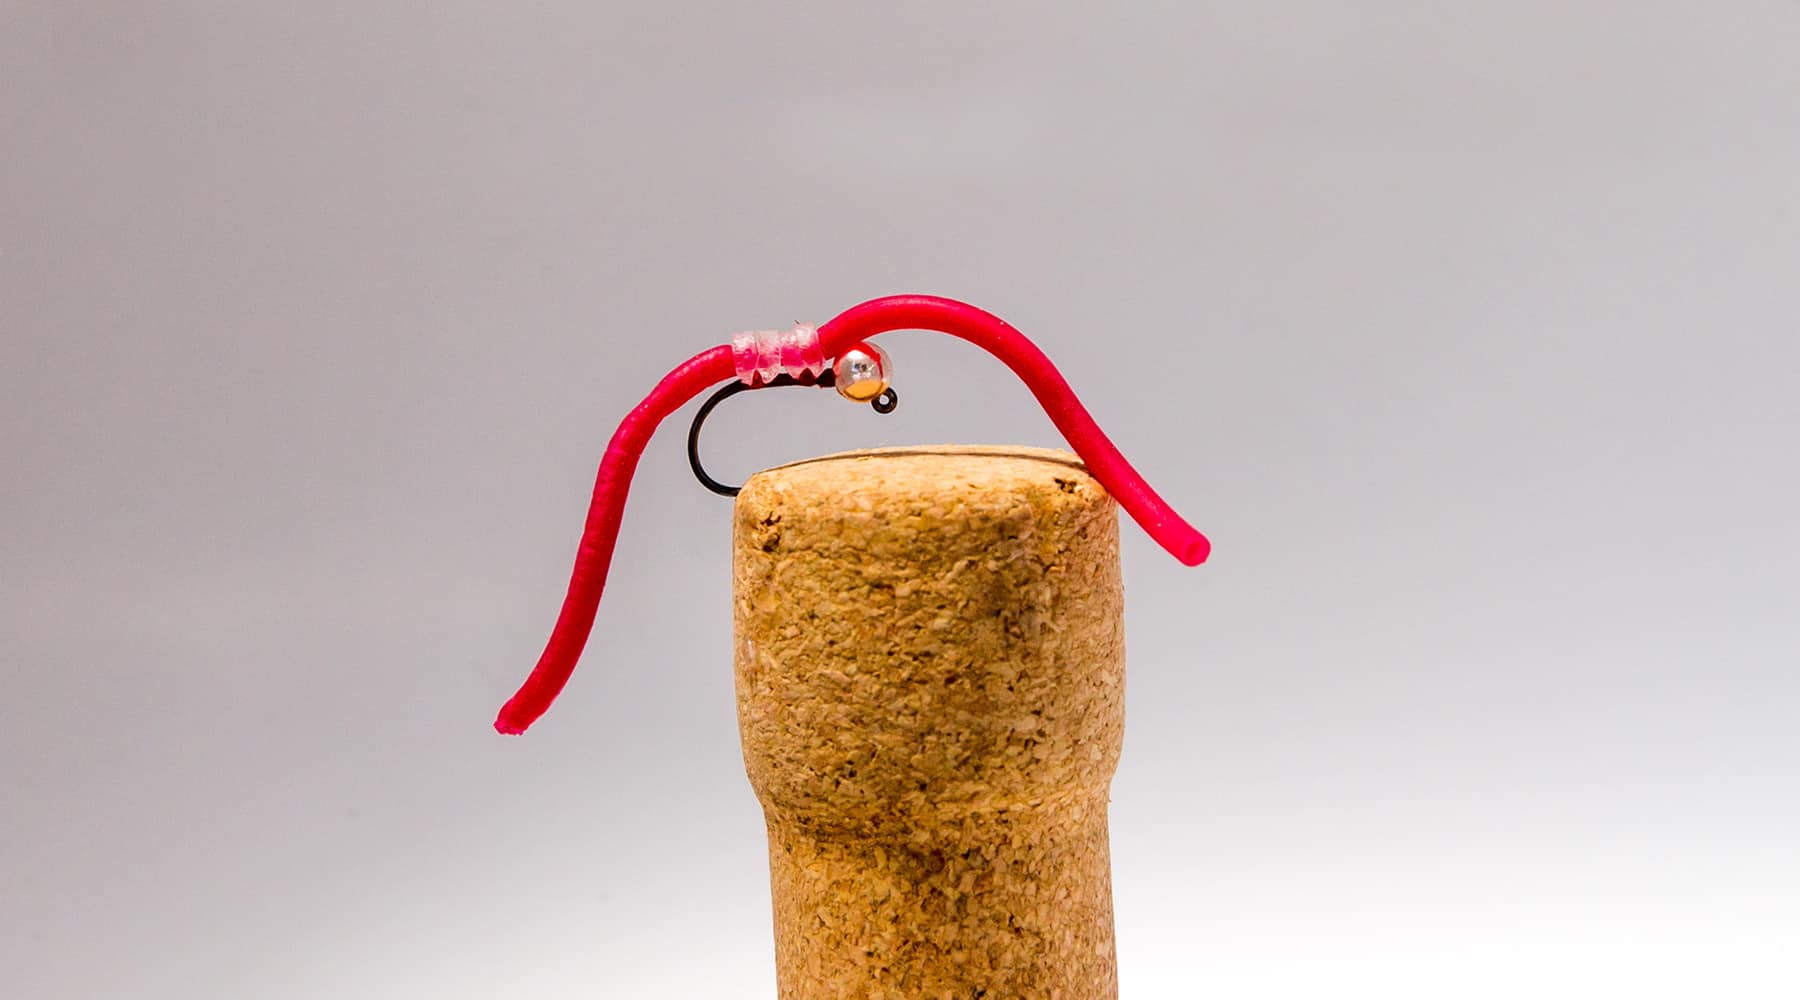 An Improved Squirmy Wormy: How to tie the improved strap on squirmy wormy fly